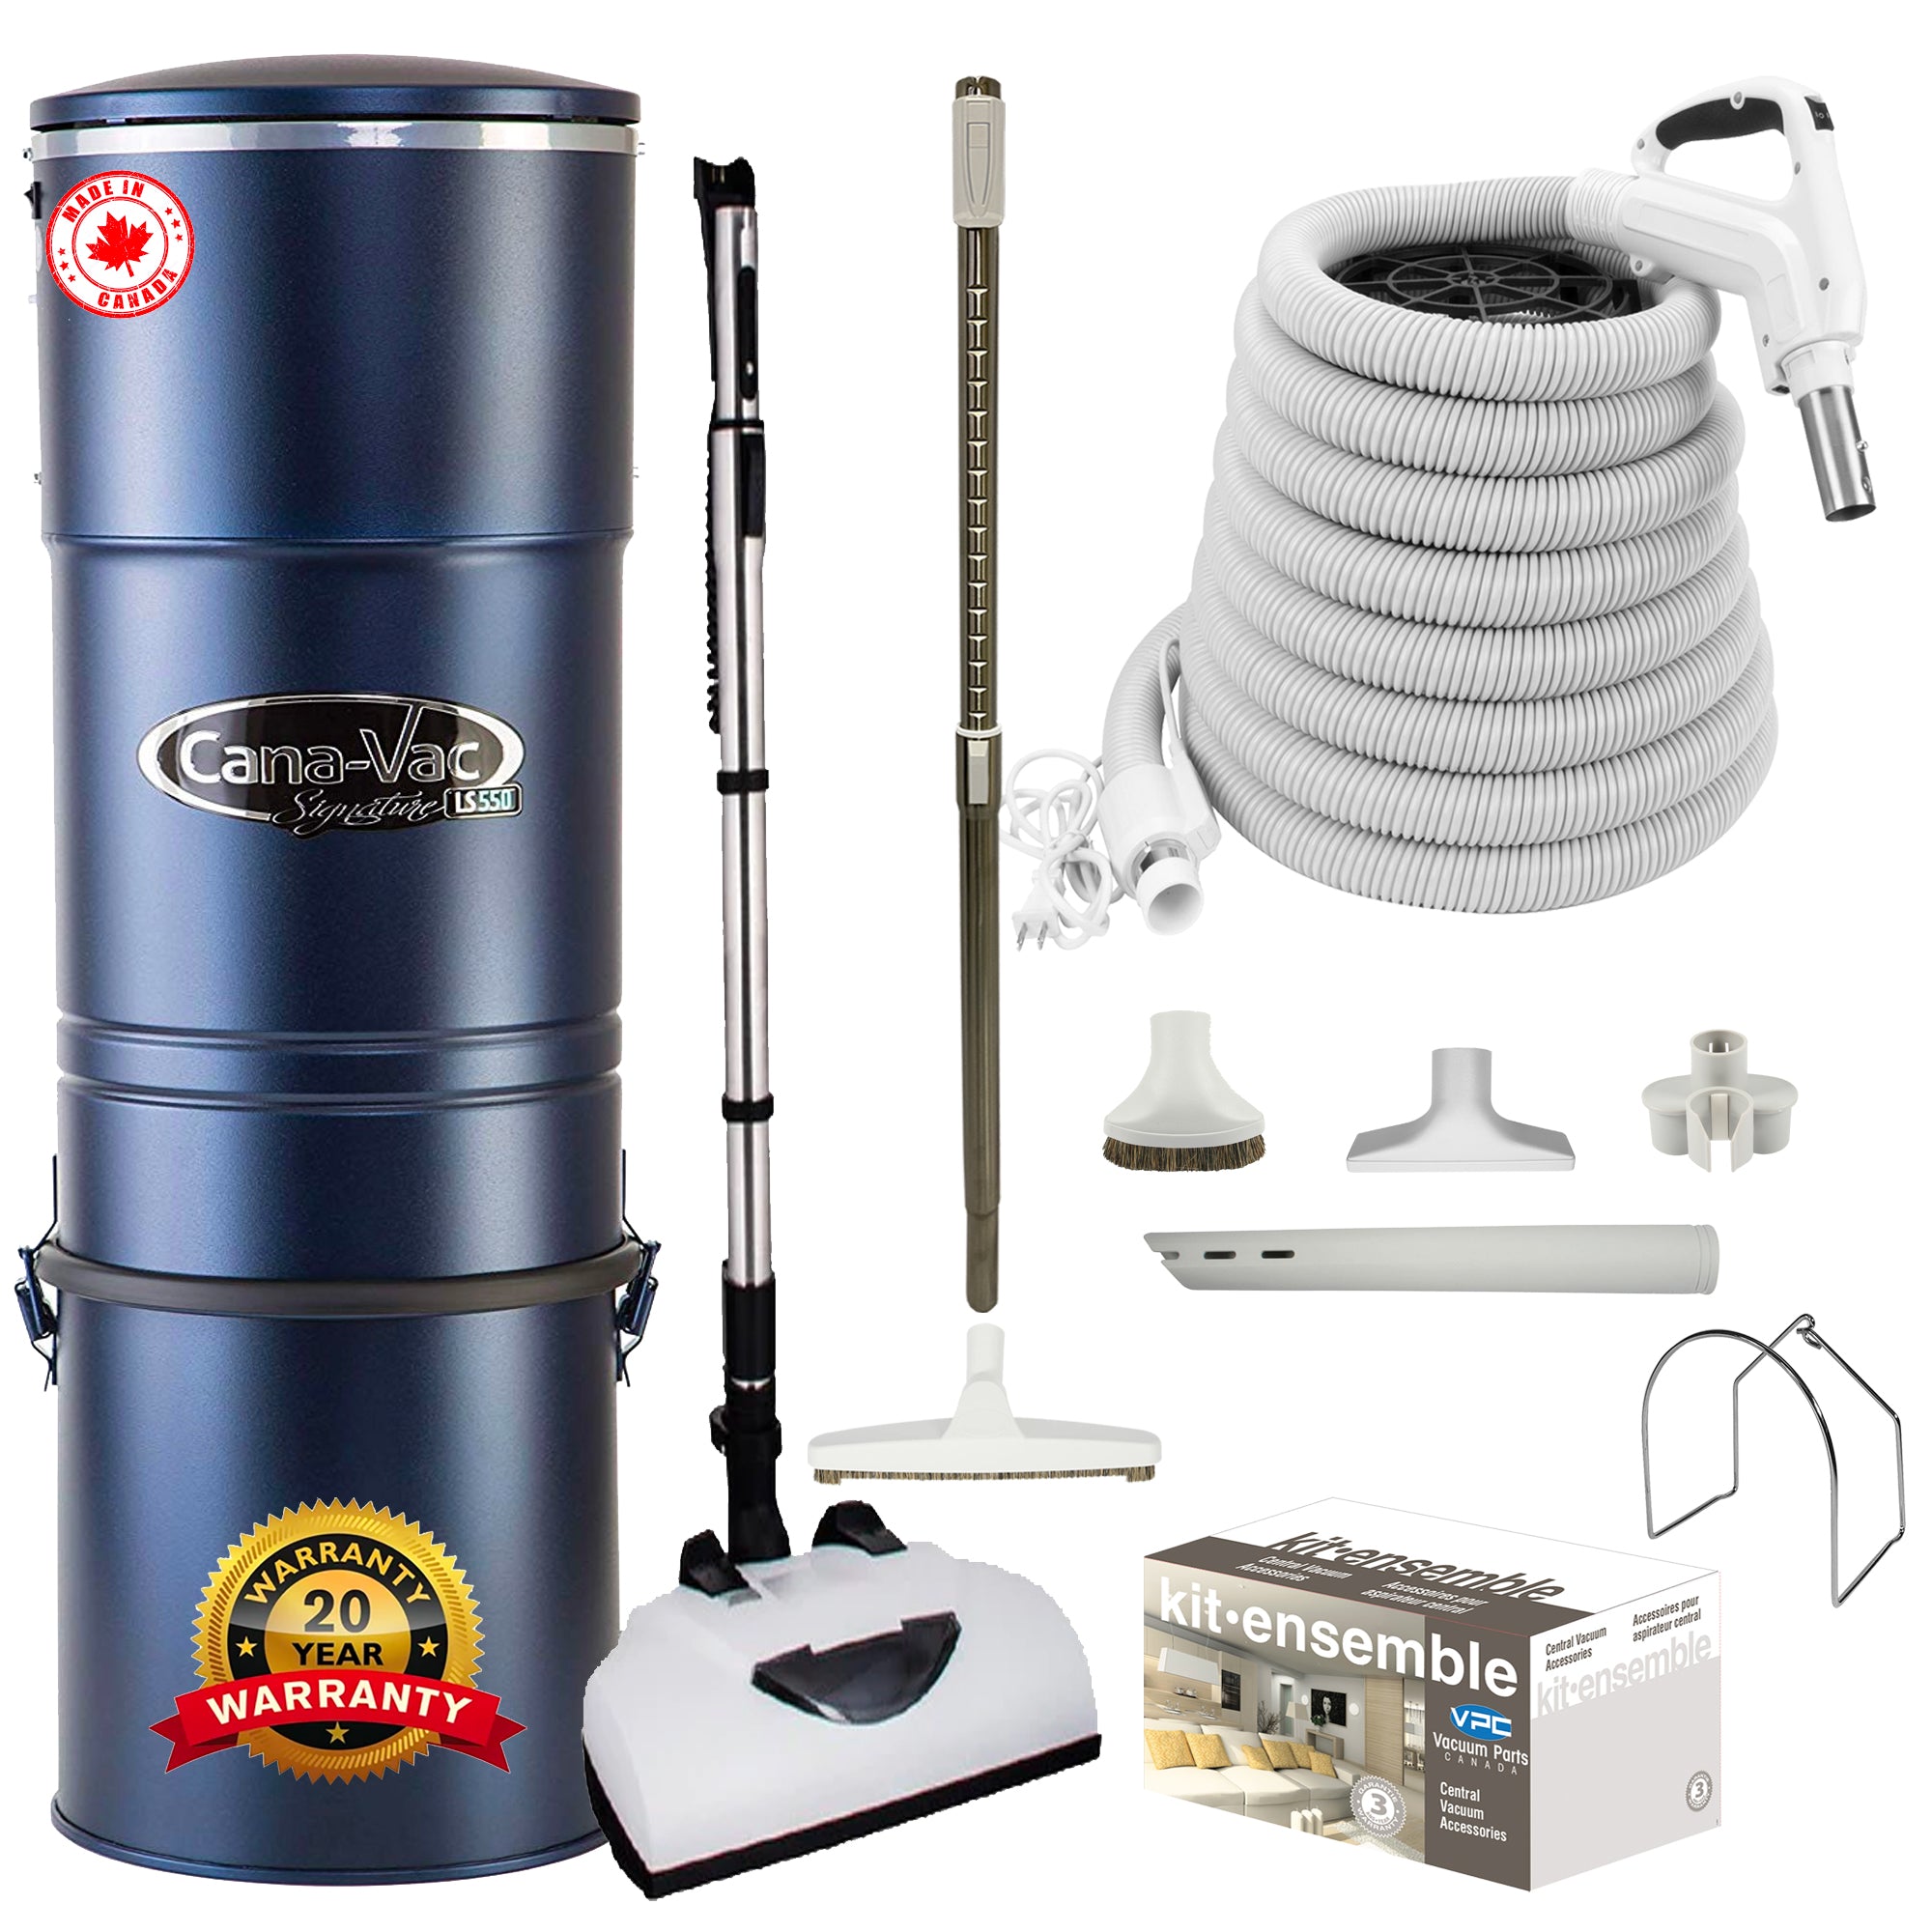 Cana-Vac LS590 Central Vacuum with Deluxe Electric Package (White)